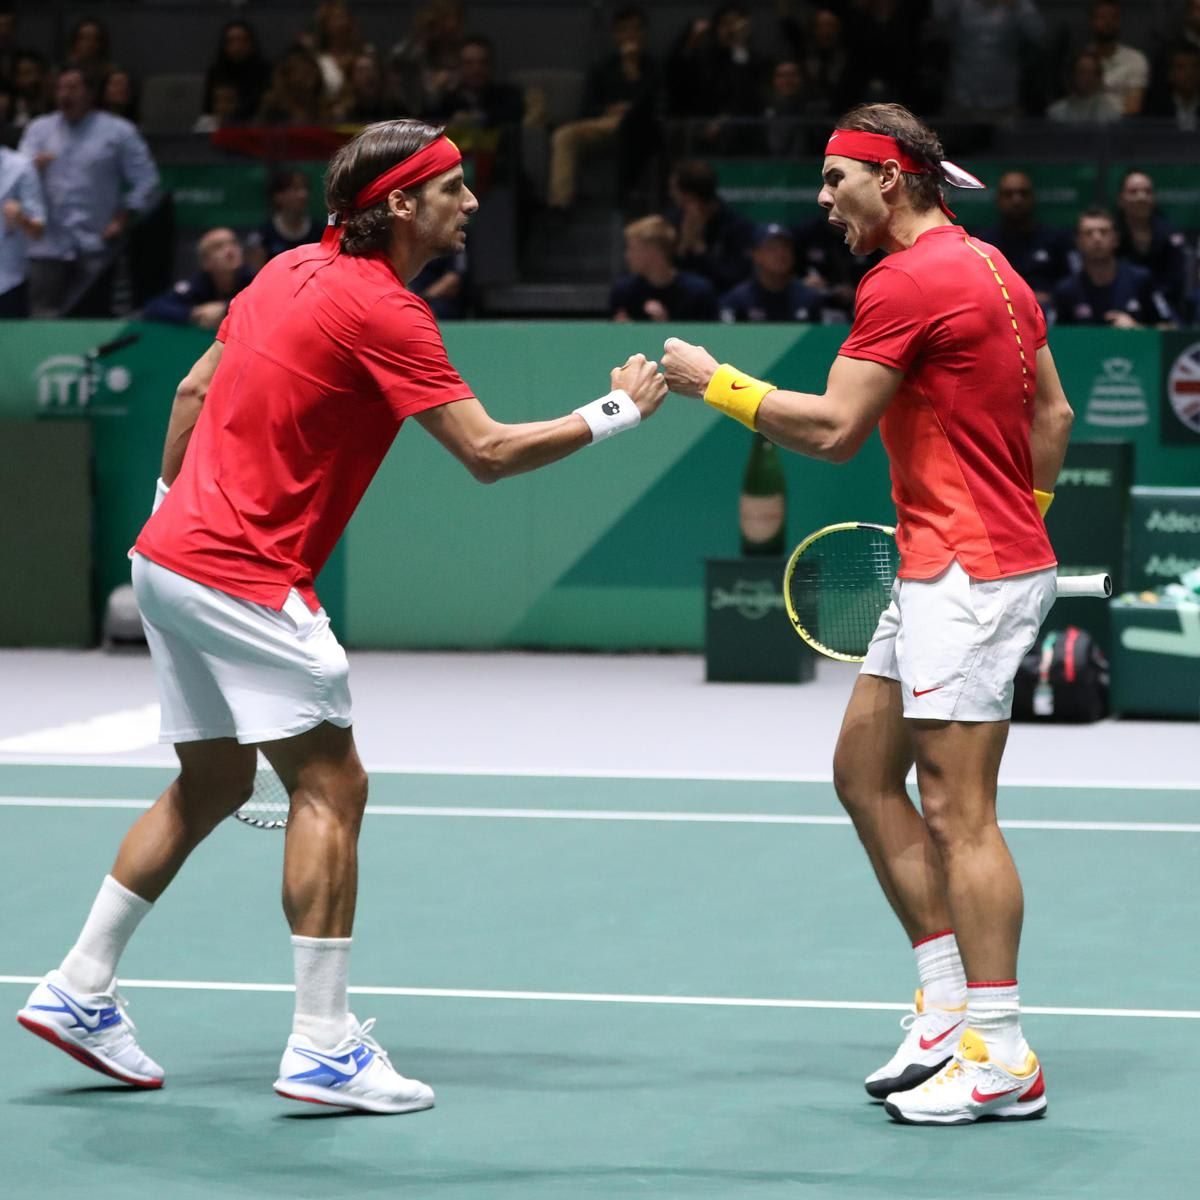 Rafael Nadal and Feliciano Lopez celebrating one of their wins   at the semi final match against Great Britain during the 2019 Davis Cup.